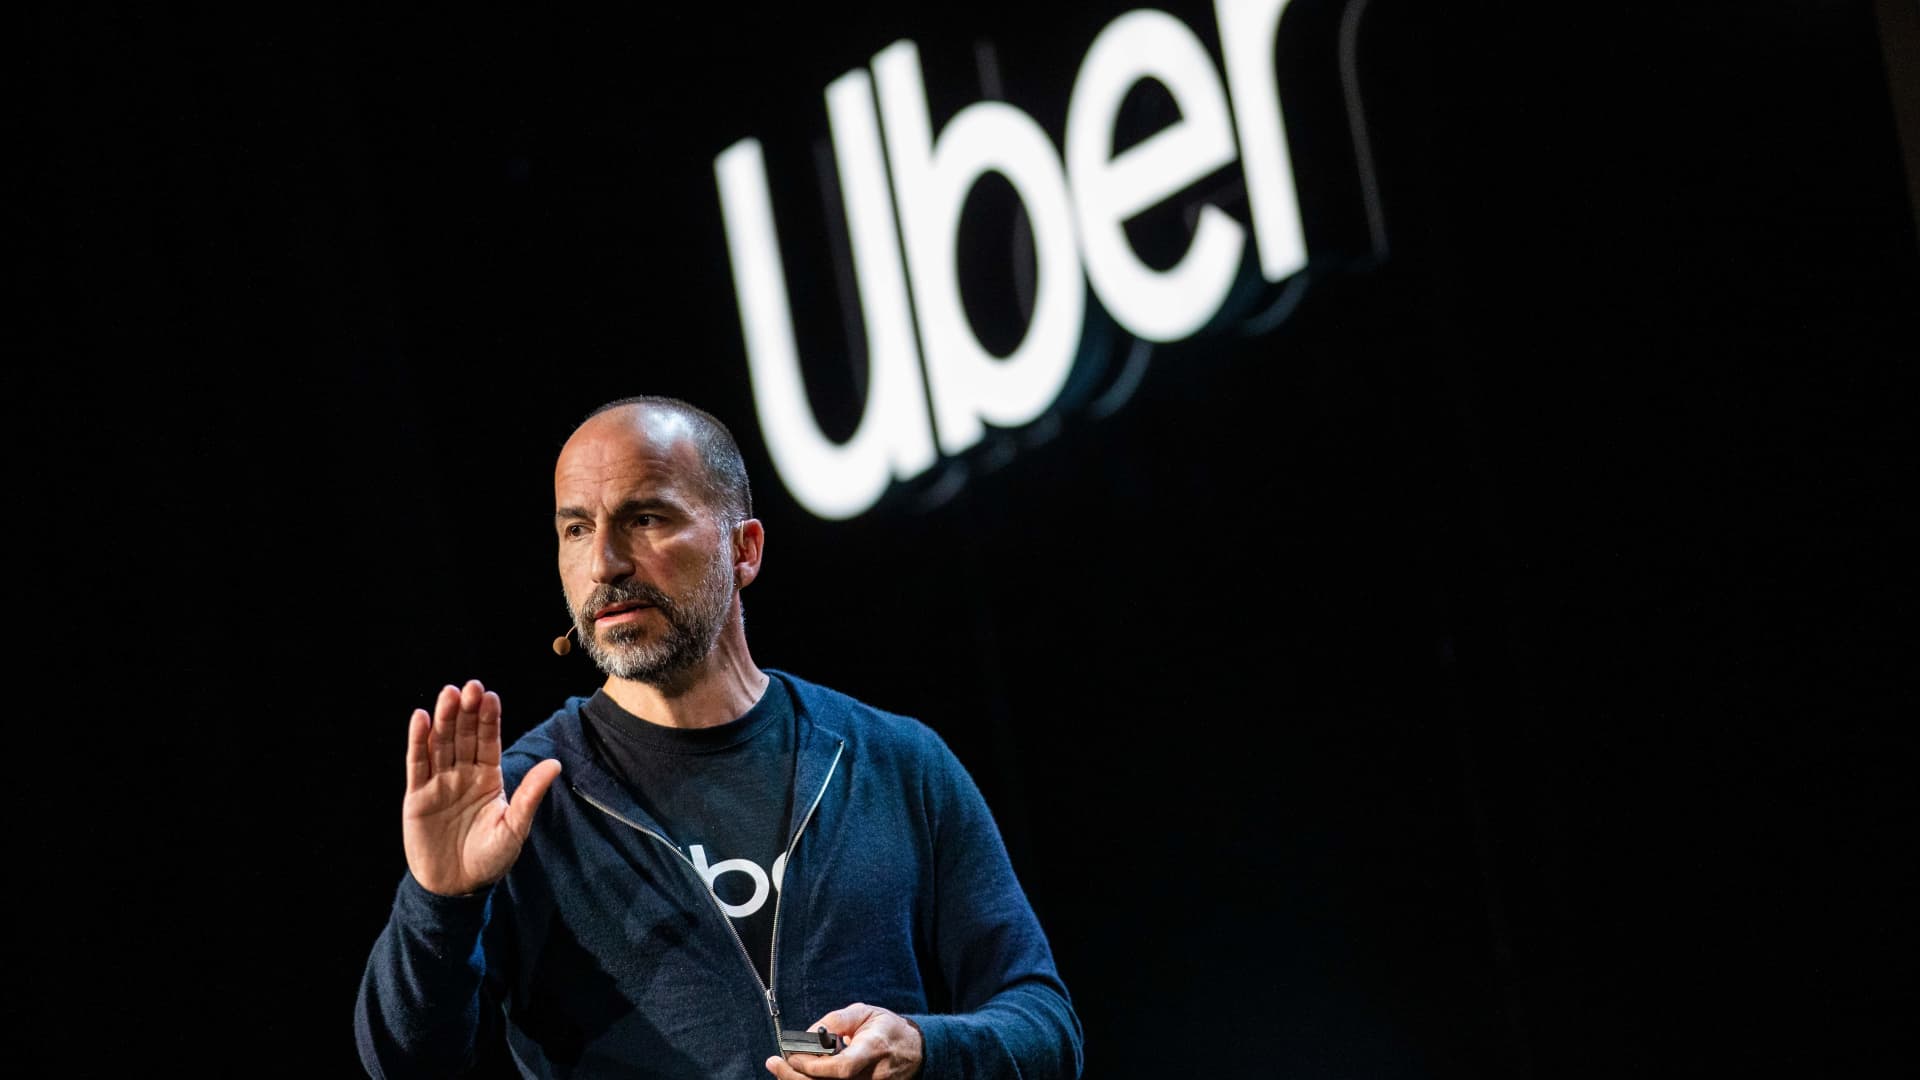 Uber to cut down on costs, treat hiring as a ‘privilege’: CEO email